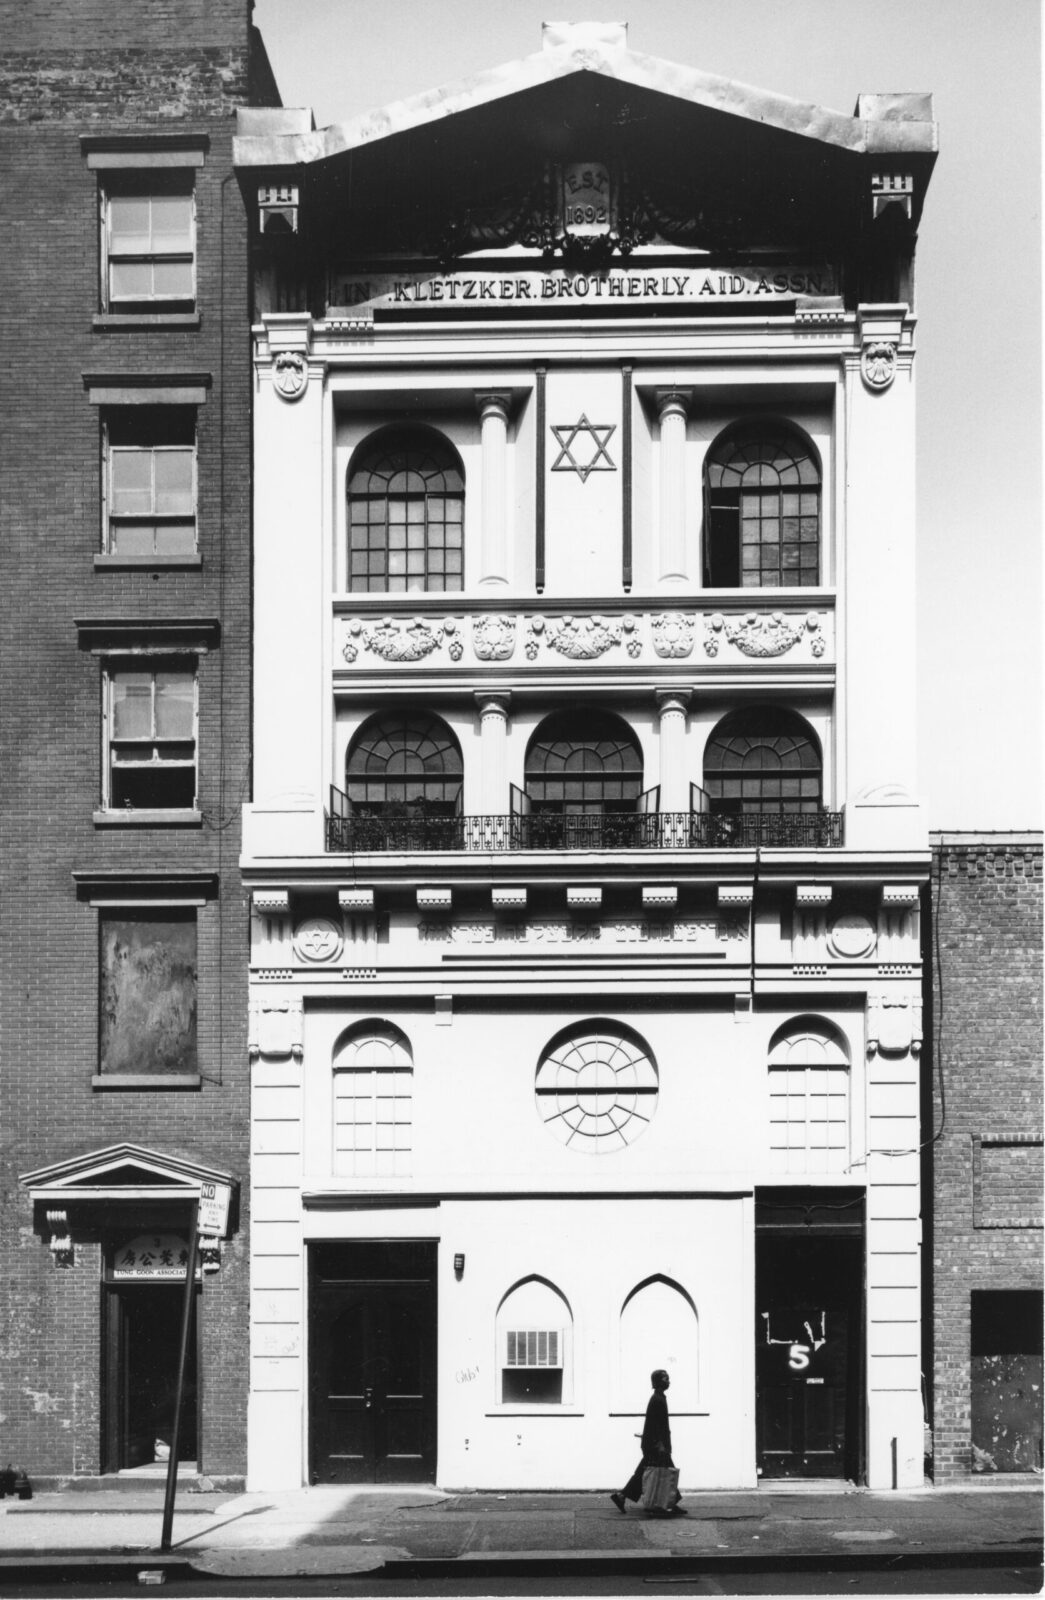 Black and white photograph of a four story tall building. It is adorned with a Jewish star and a plaque near the top “Kletzker Brotherly Aid Assn.” 